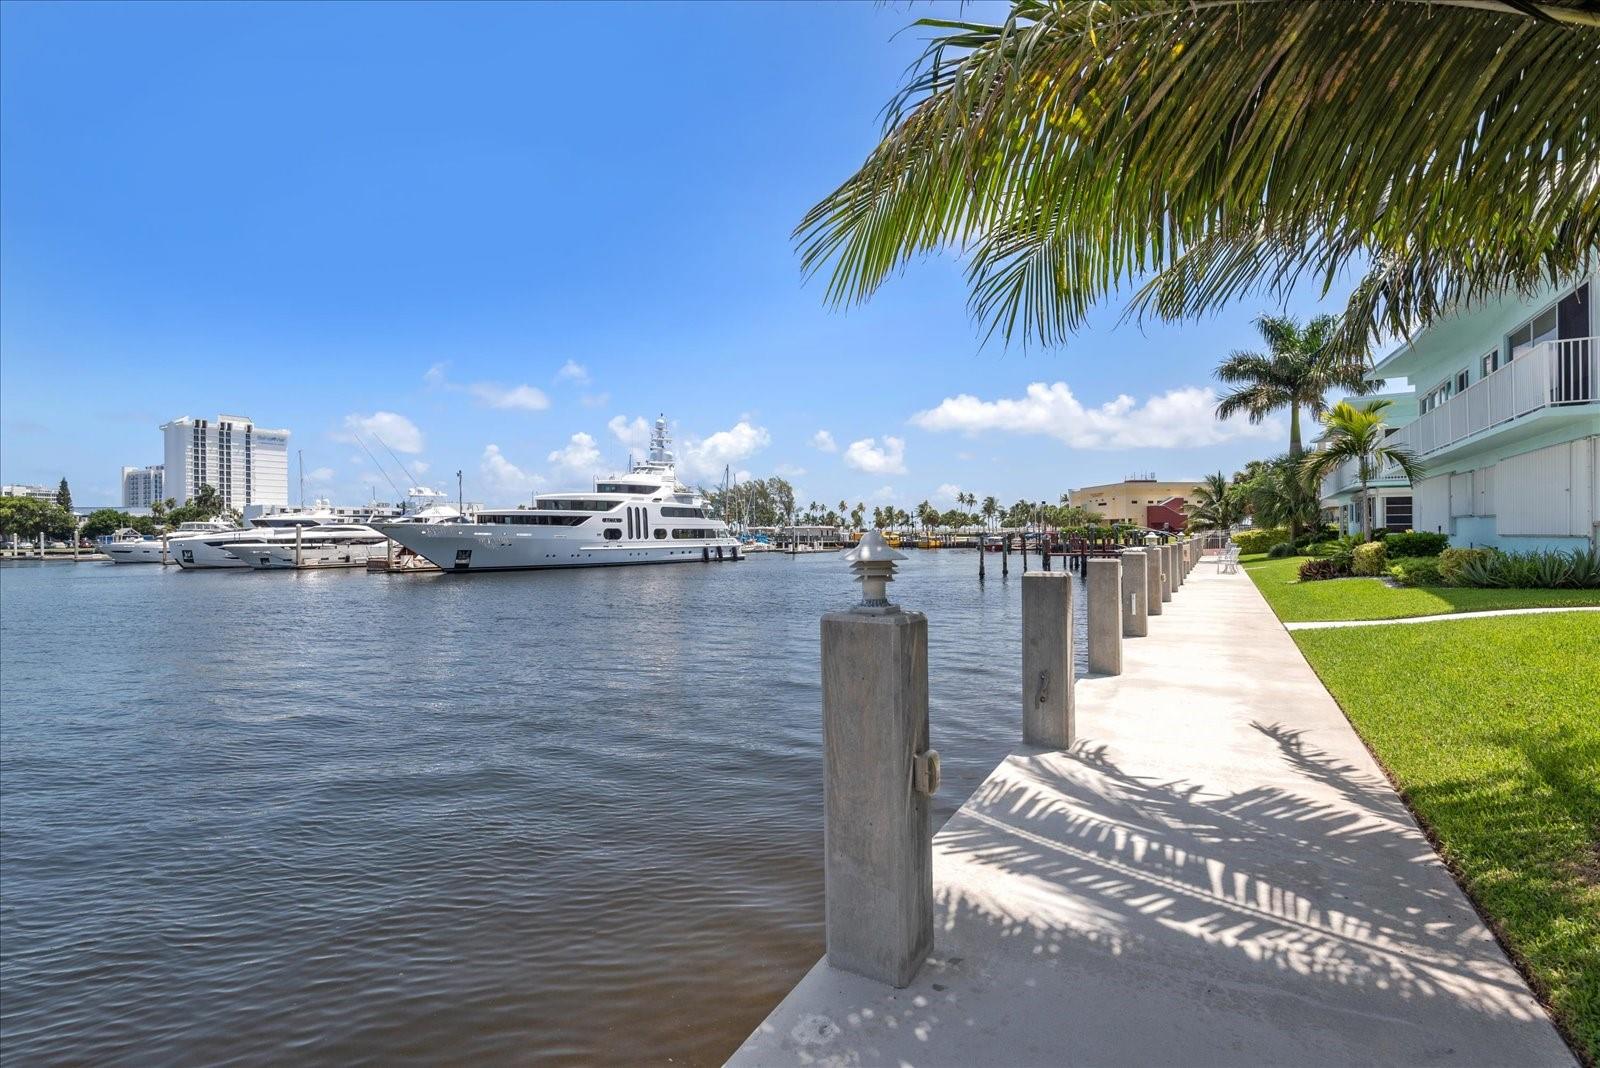 View Fort Lauderdale, FL 33316 co-op property